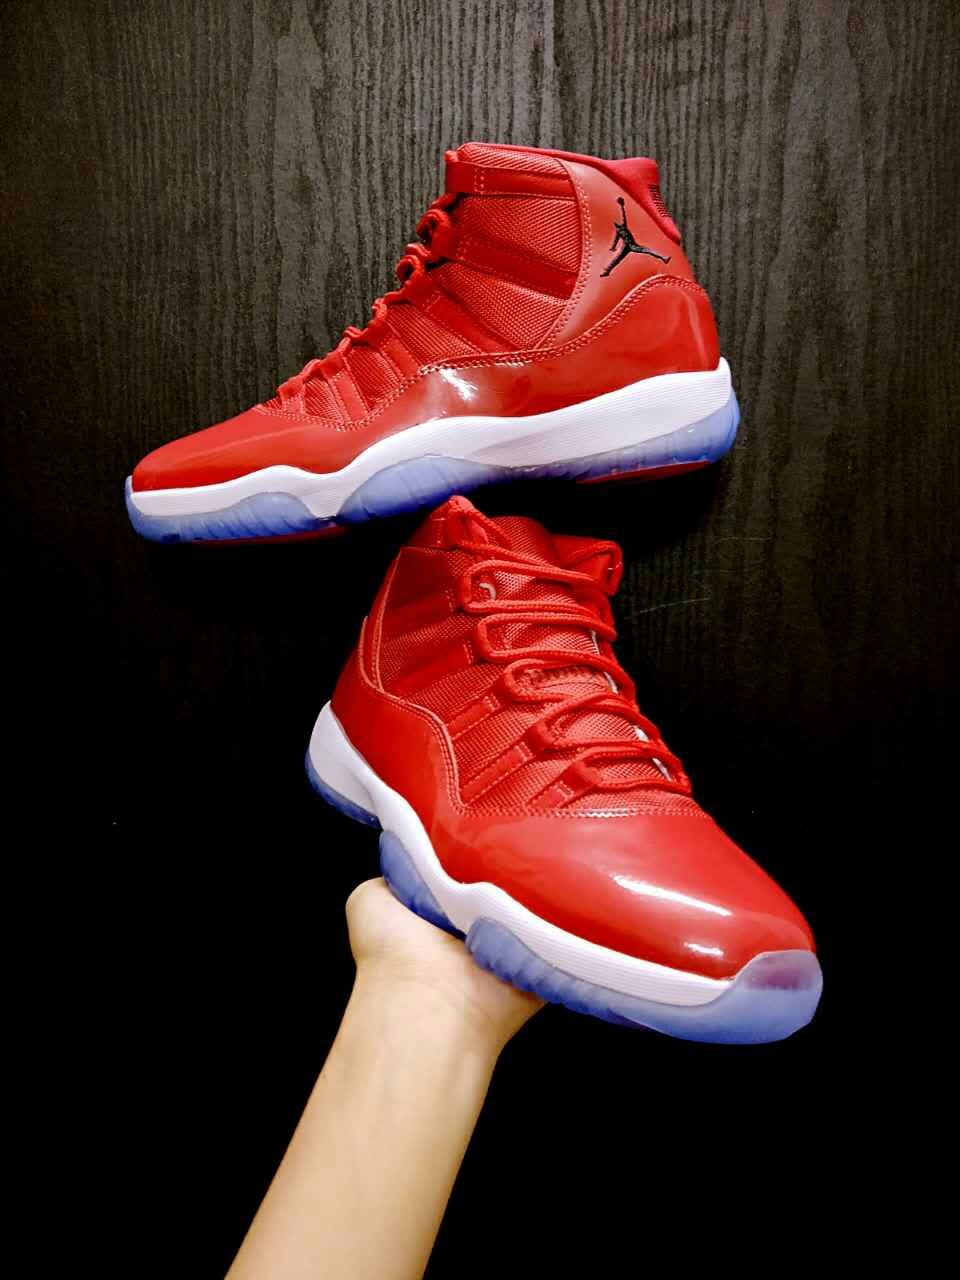 New Air Jordan 11 All Red Ice Sole Lover Shoes - Click Image to Close